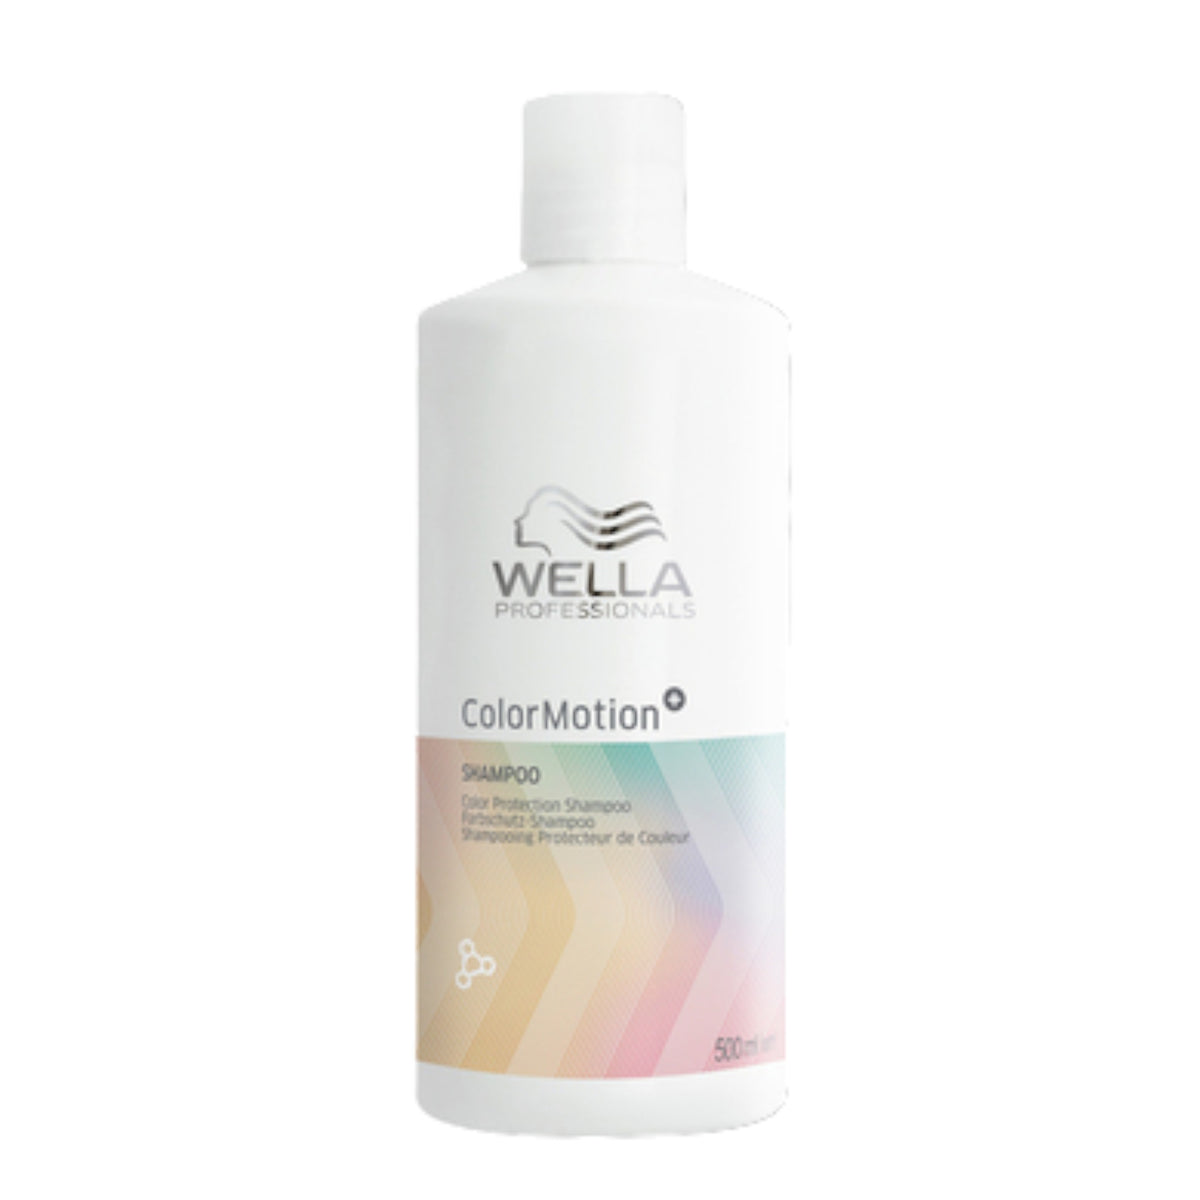 Wella Professionals ColorMotion Color Protection Shampoo 500ml